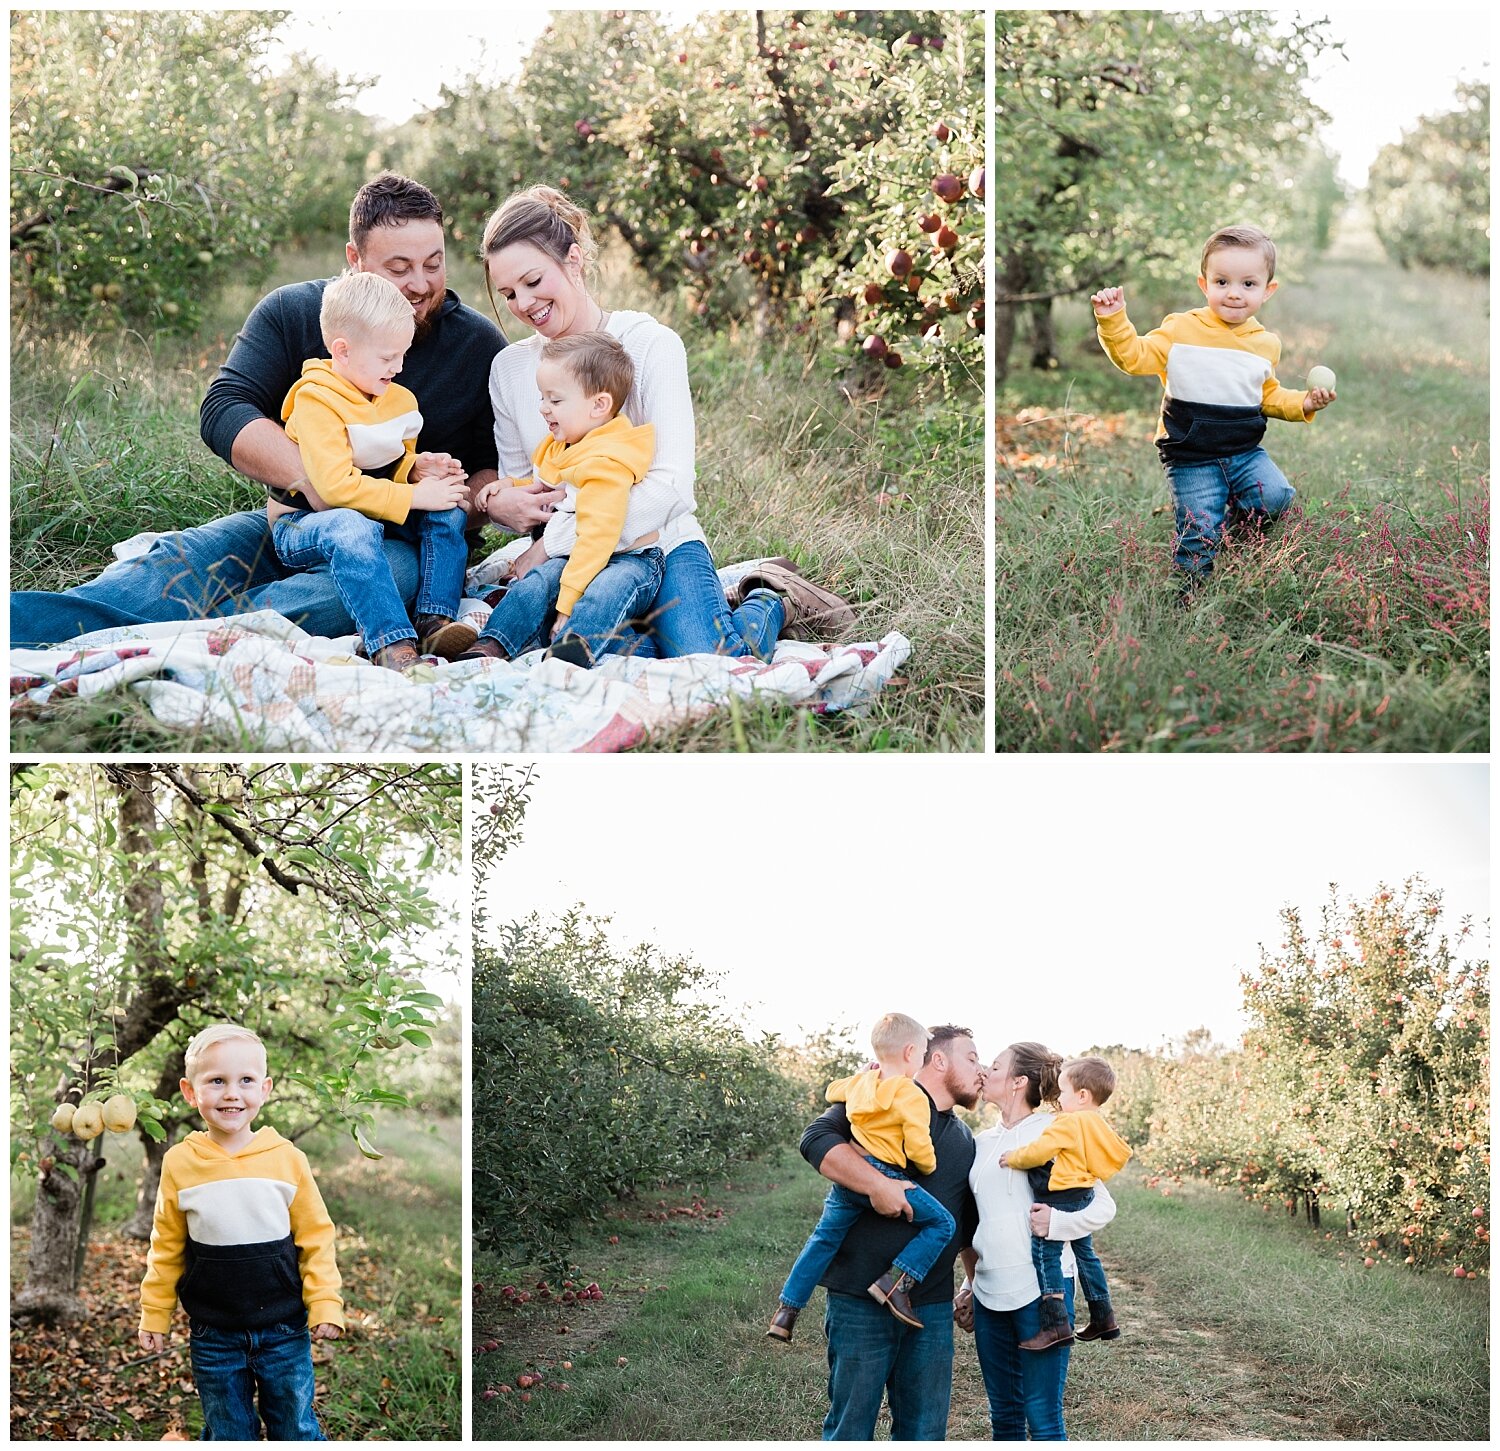 Fall mini session at the apple orchard in Cleveland, Tennessee with two small kids